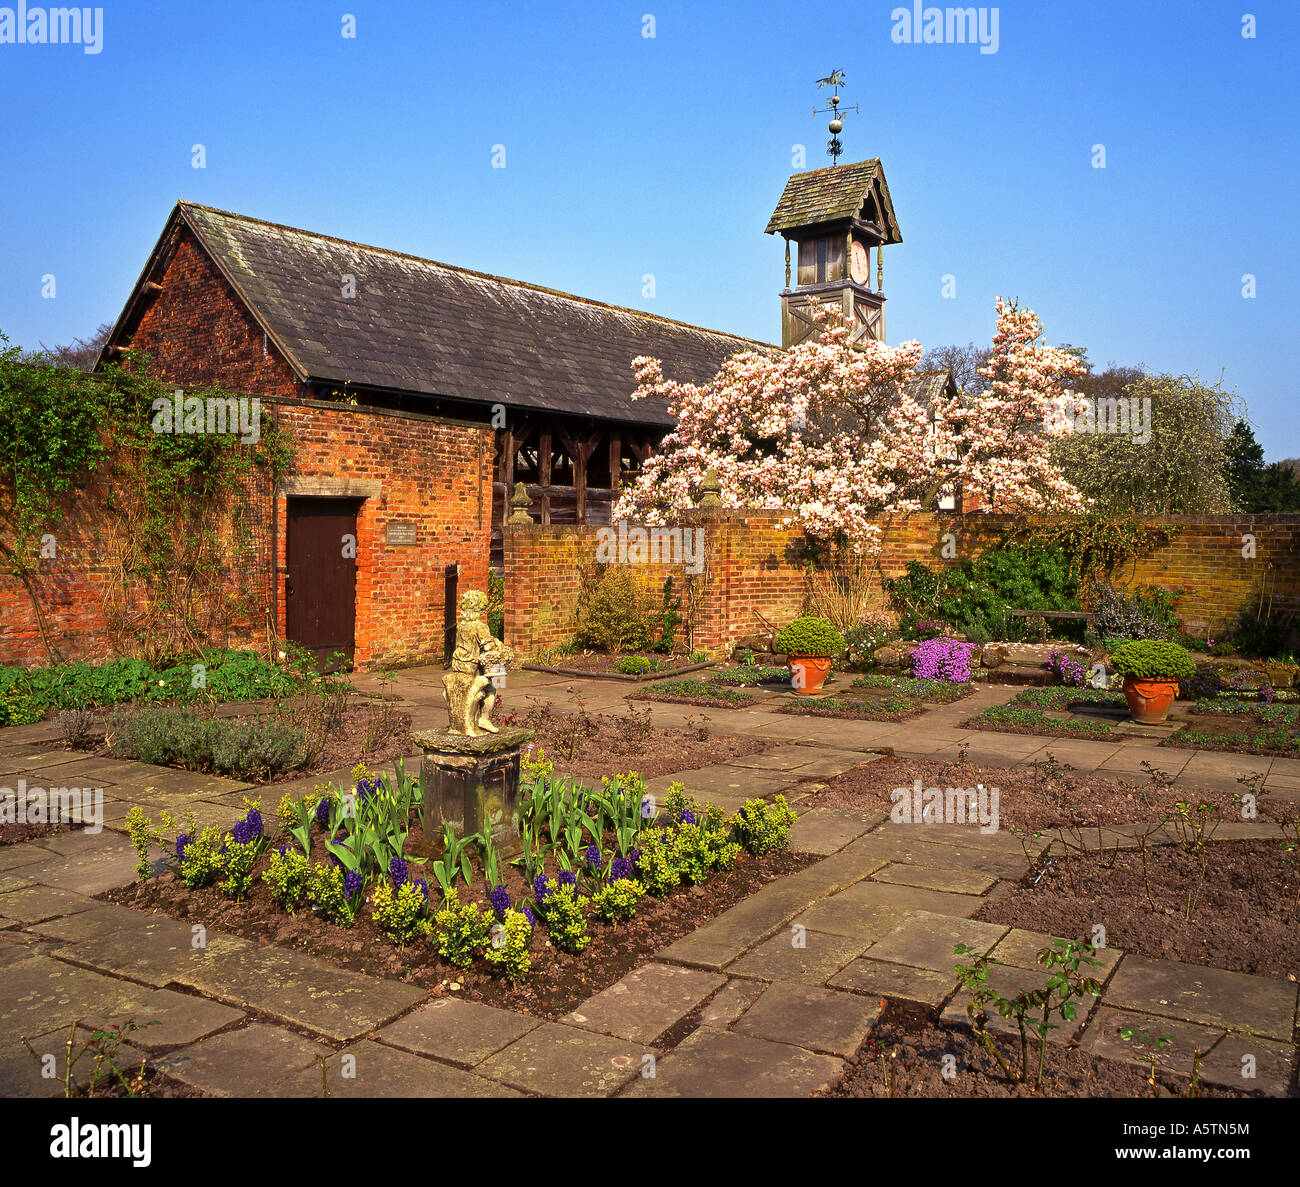 The Walled Garden, Cruck Barn and Clock Tower, Arley Hall and Gardens, Near Knutsford, Cheshire, England, UK Stock Photo